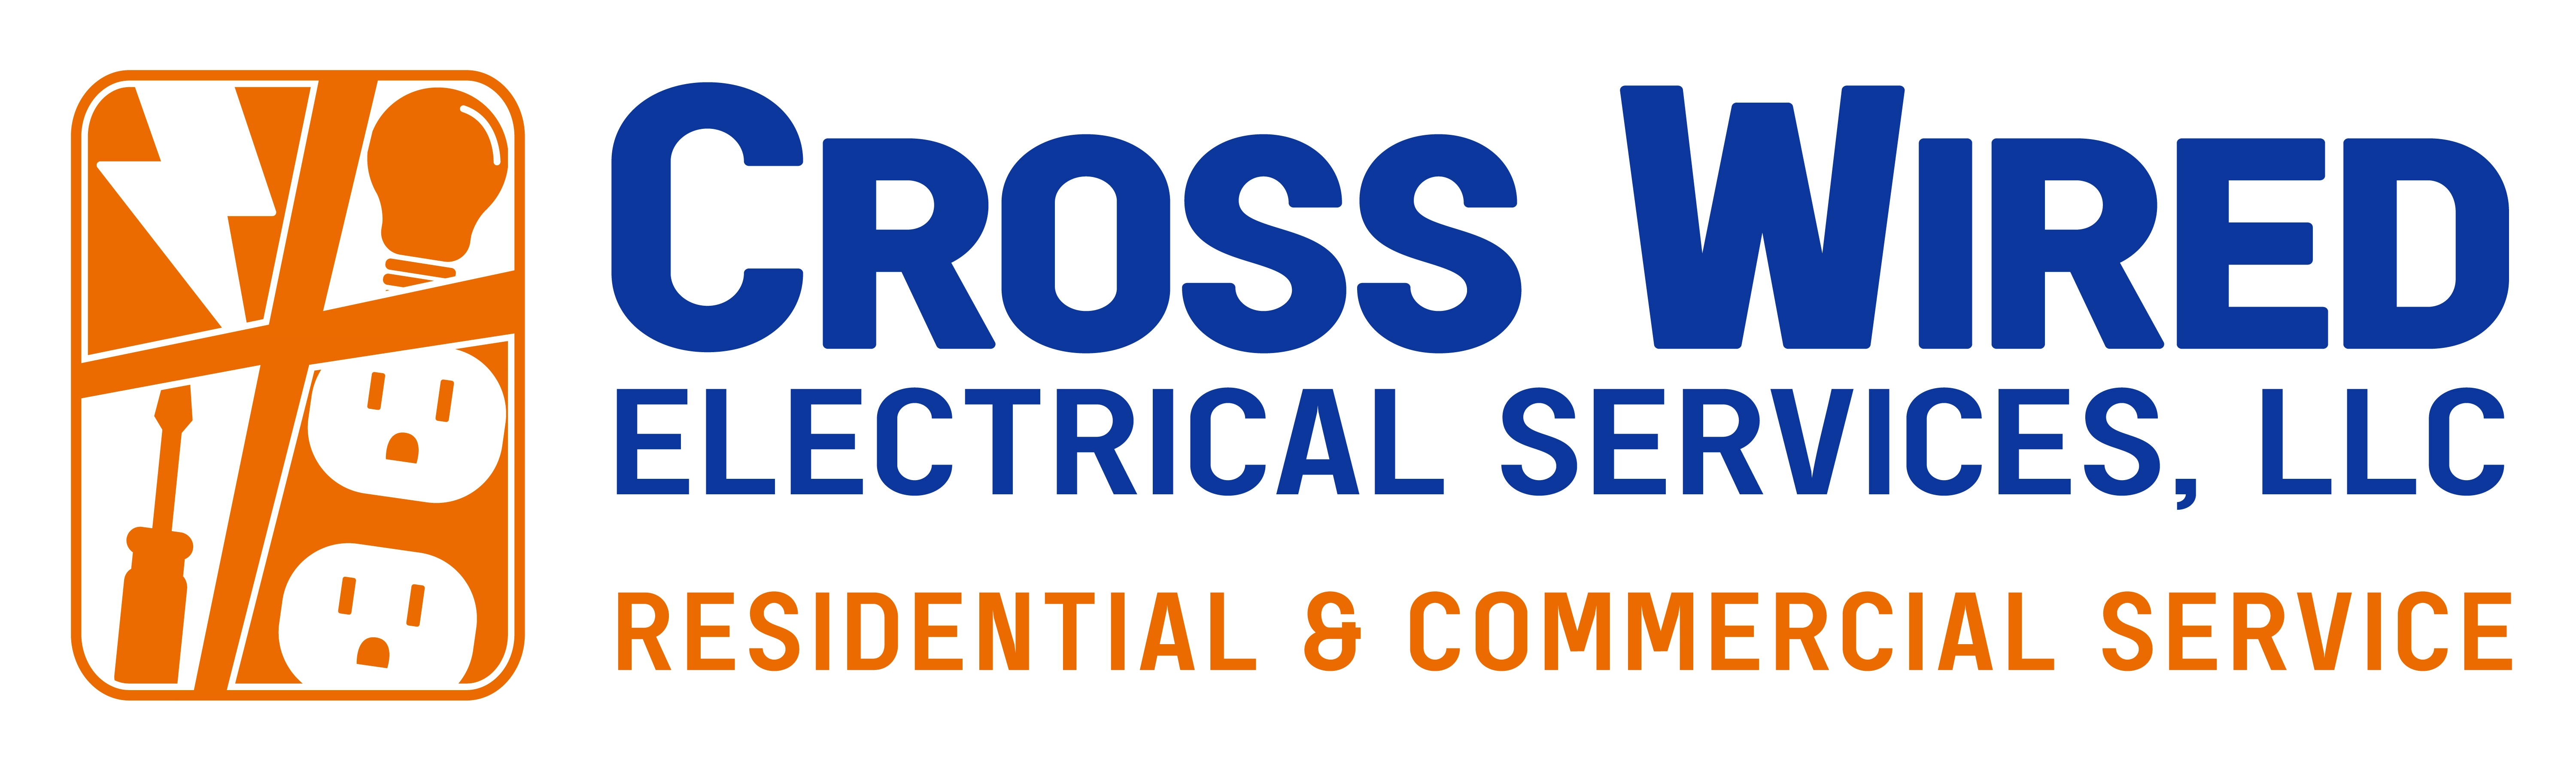 Cross Wired Electrical Services Logo